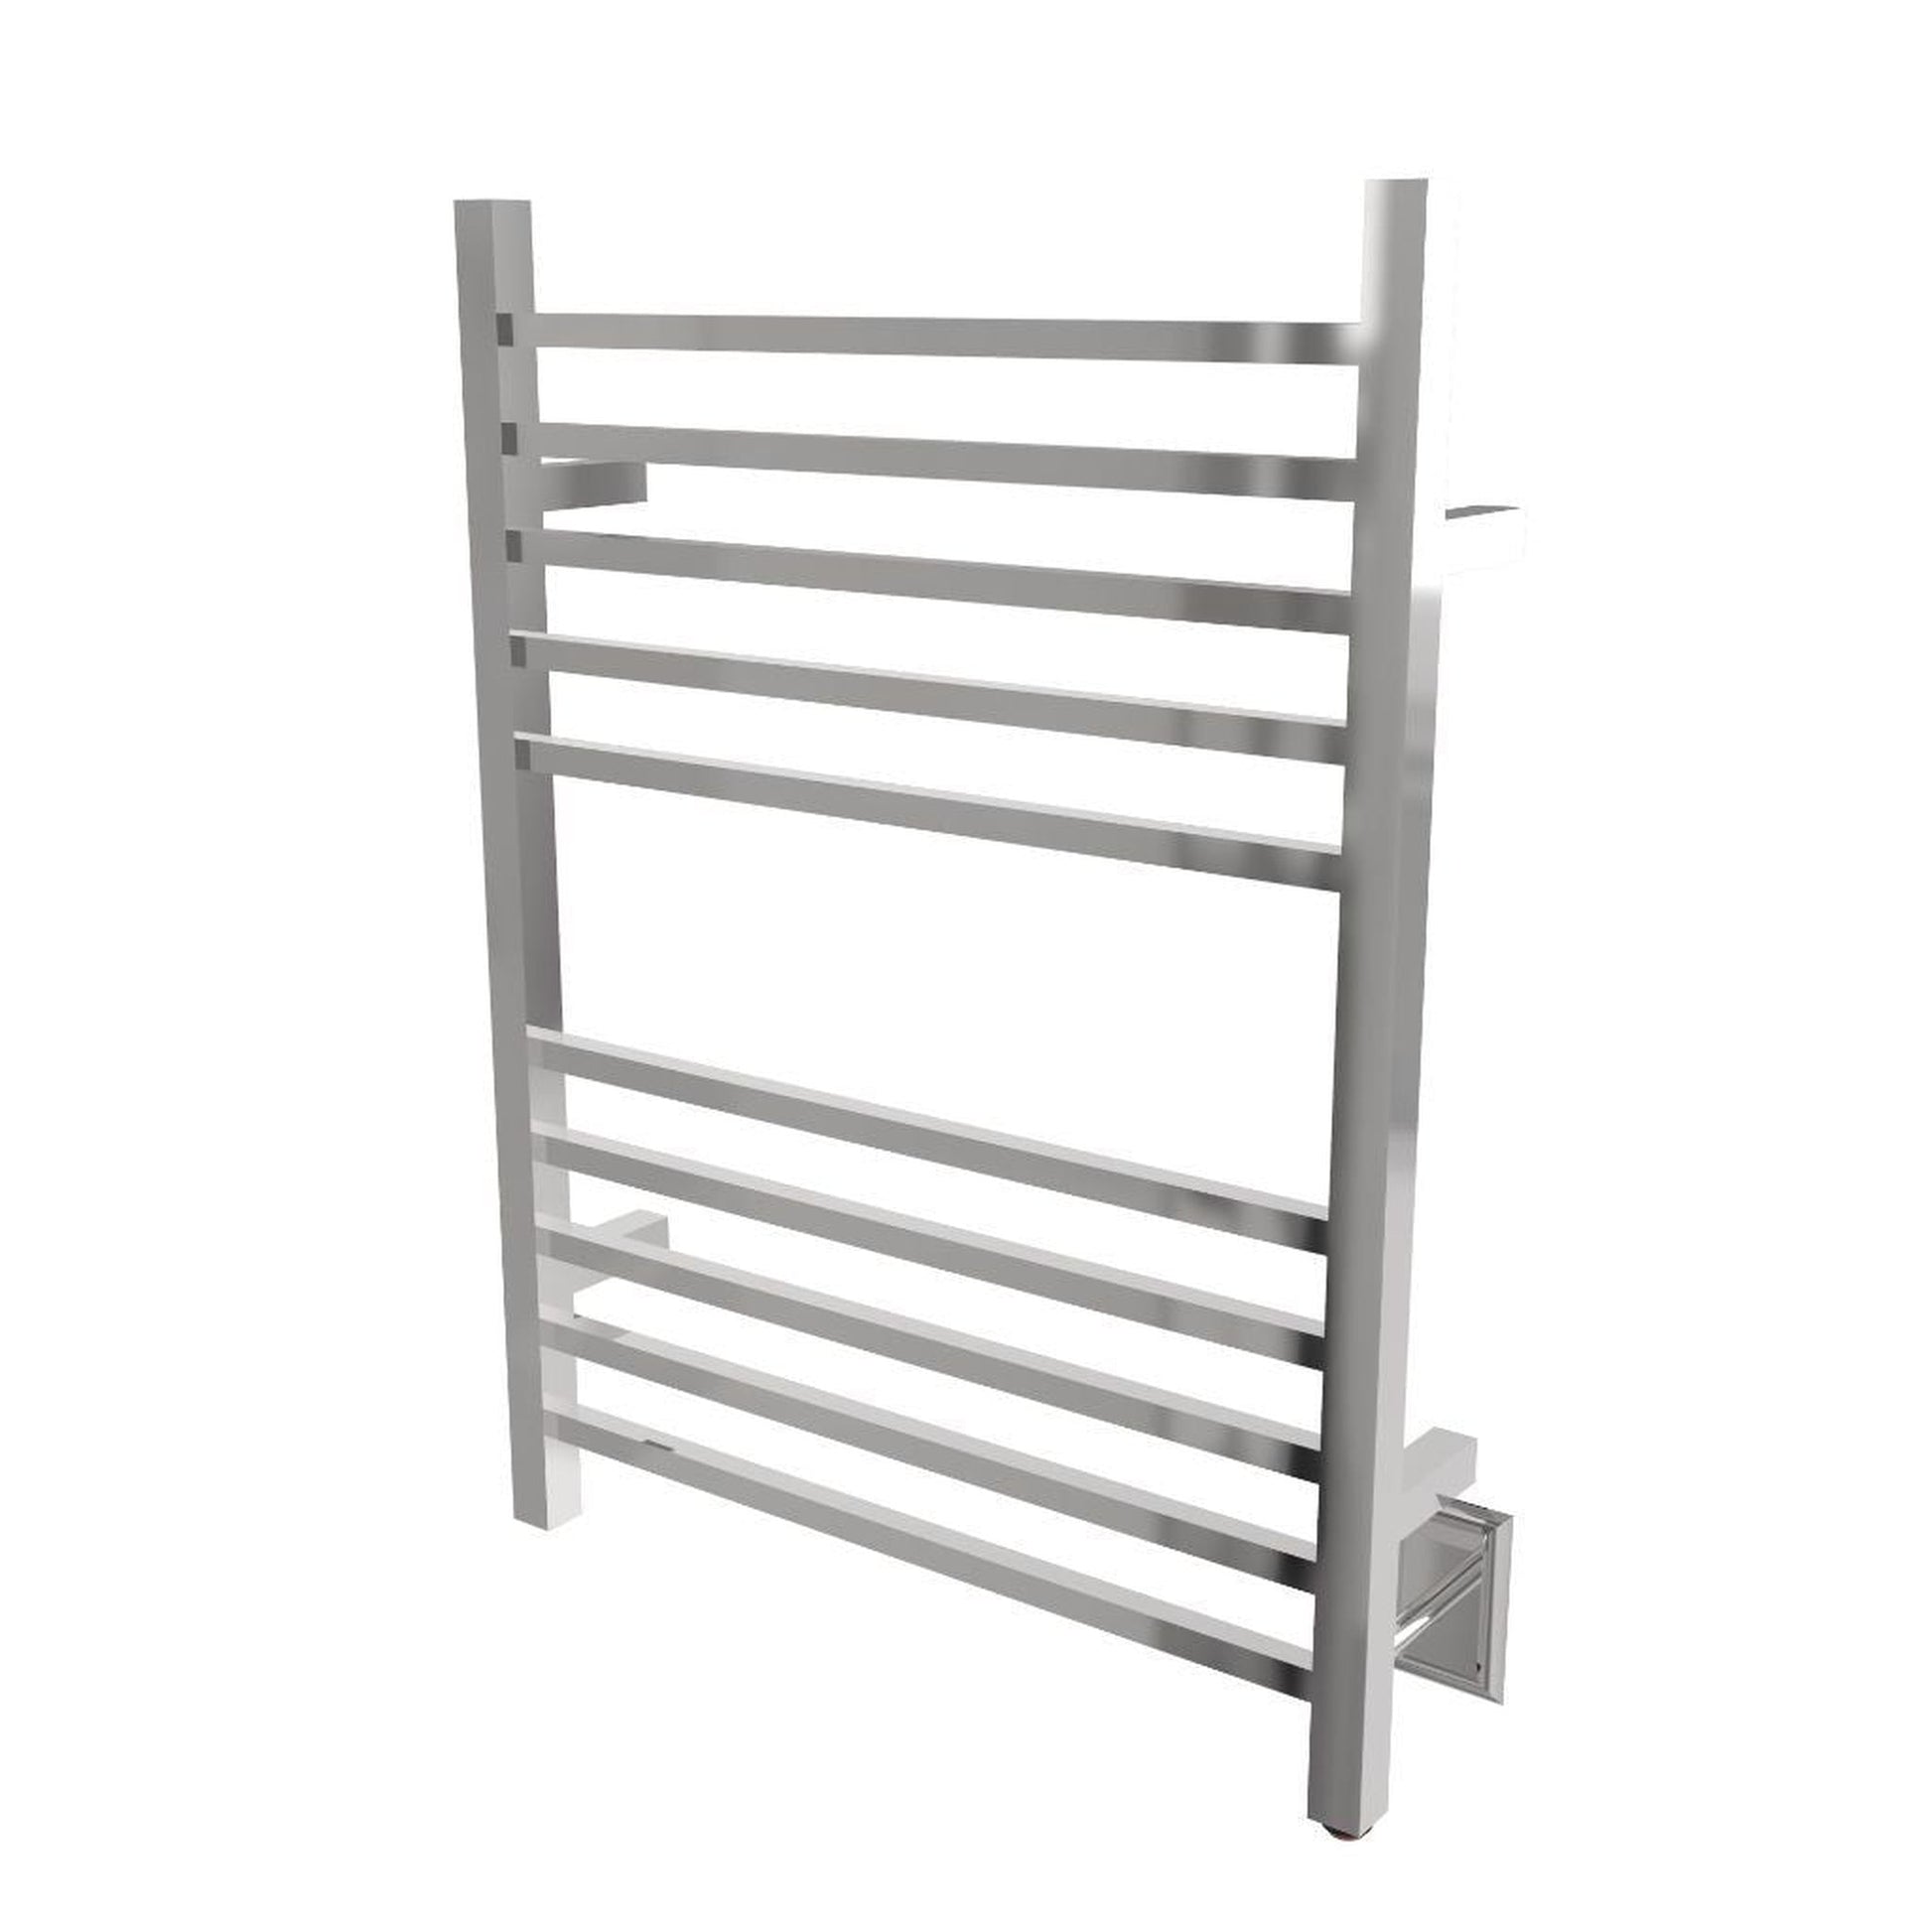 Amba Radiant Square 10-Bar Polished Stainless Steel Hardwired Towel Warmer